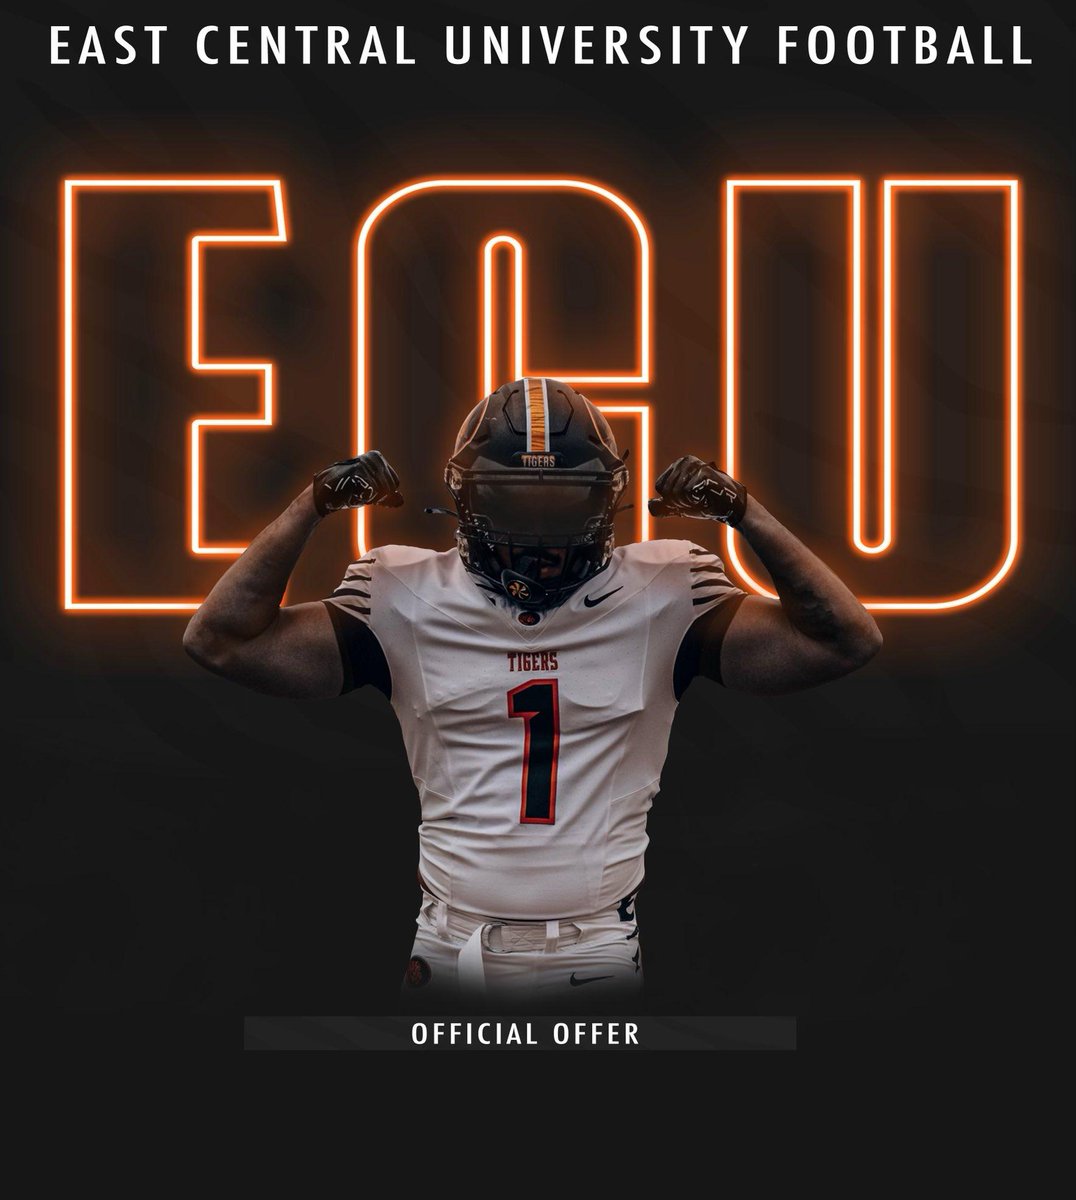 After great conversation with @CoachIngramECU I'm grateful to receive another opportunity to pursue my athletic career at East Central University🐅!#OnceATigerAlwaysATiger|@ECUTigersFB @alleneaglesfb @CoachLWig @LarryWMcrae @AlberdingShawn @ChaseHargis @fbcnt4 @Coach_Gonzales